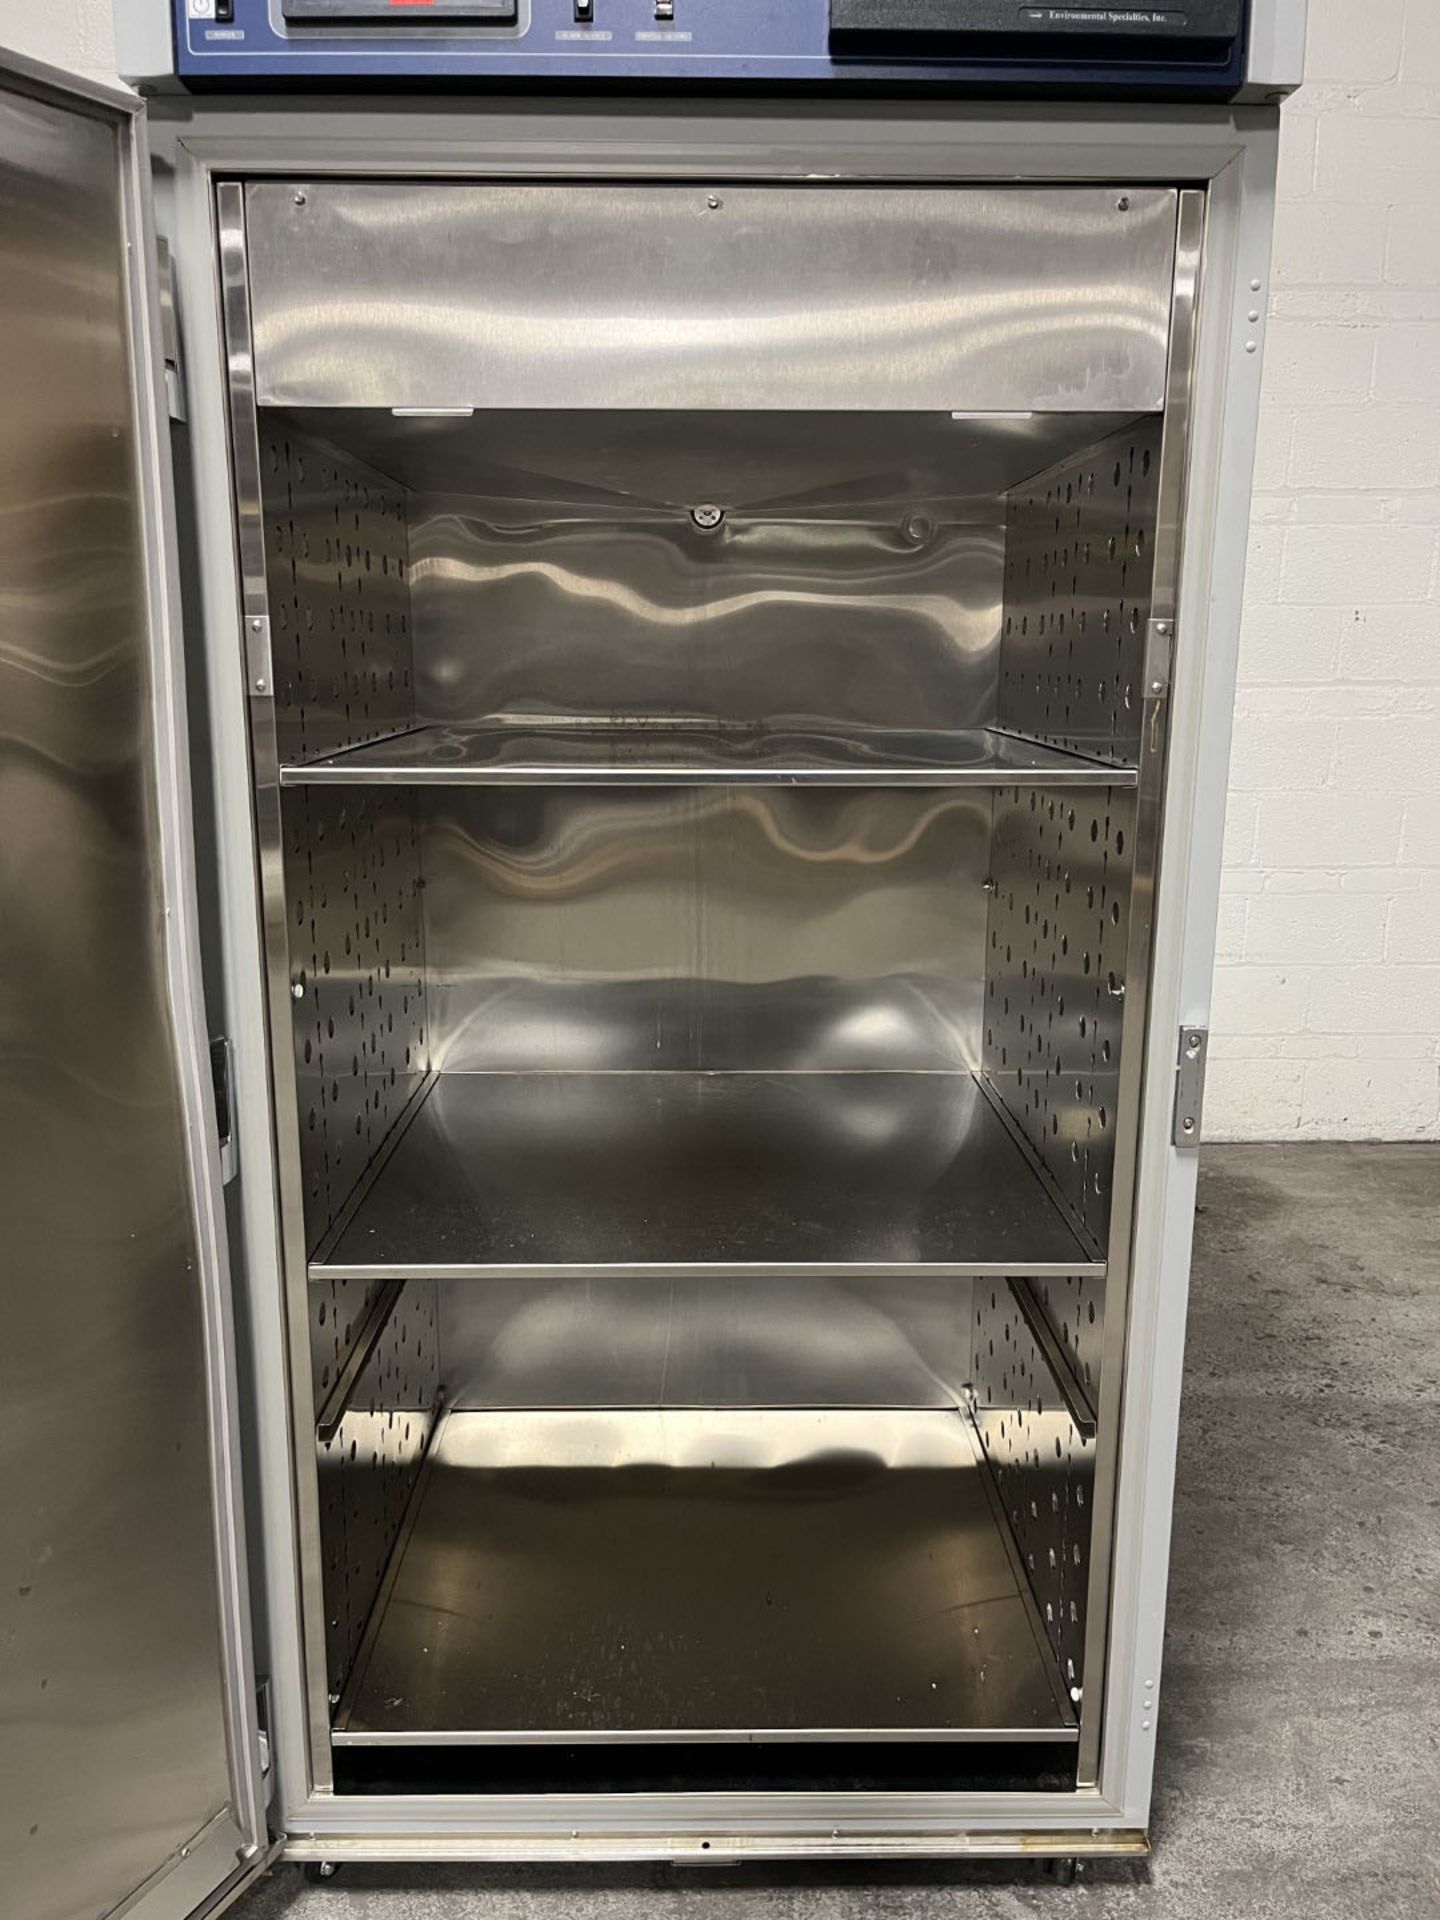 Environmental Specialties stability chamber, model ES2000CDM, stainless steel interior, 34" wide x - Image 2 of 6